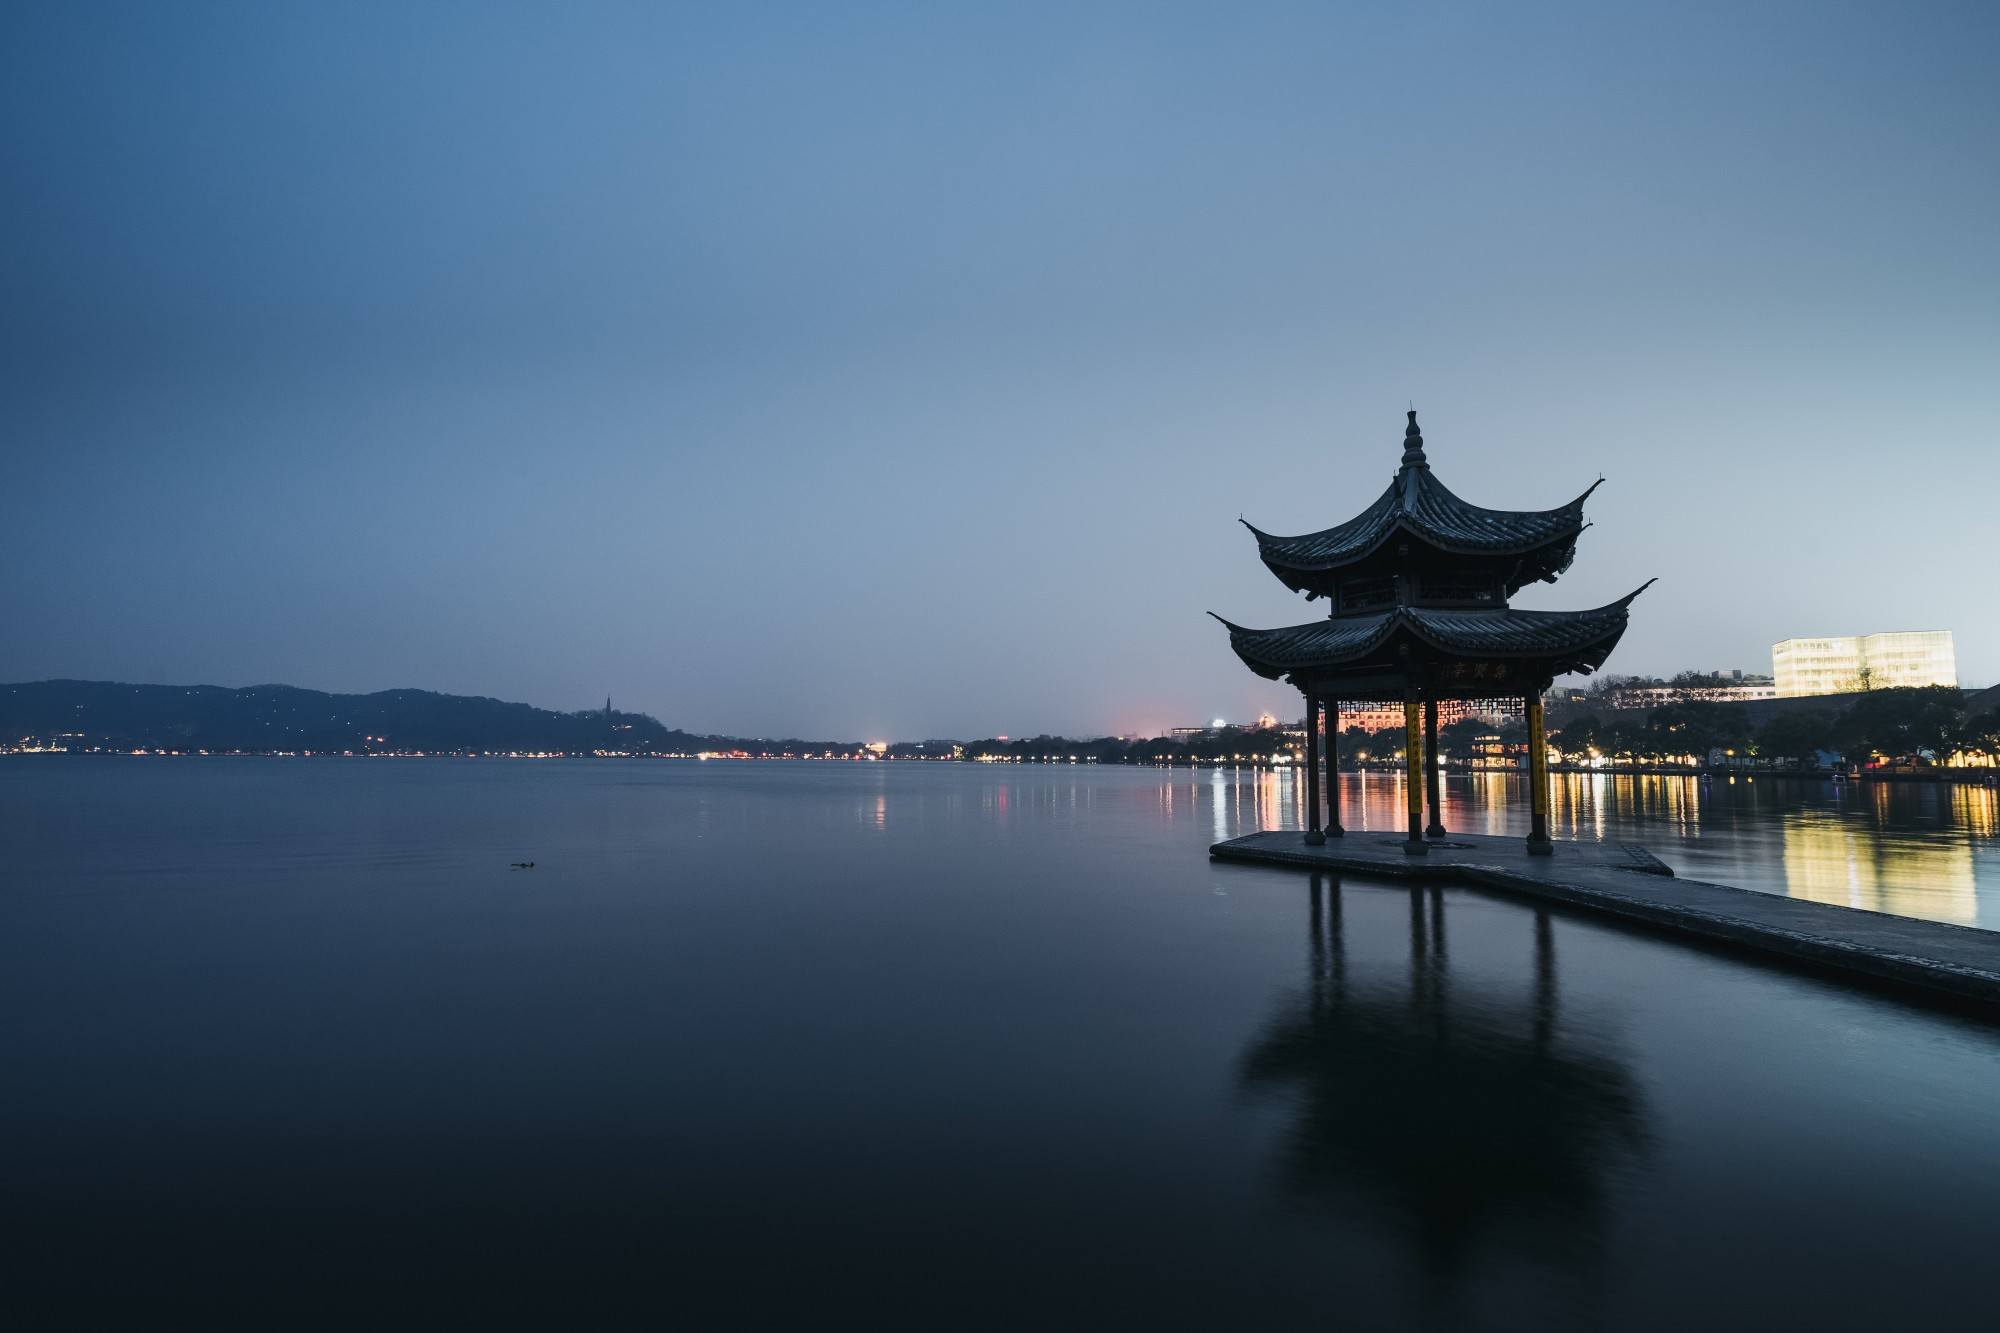 Night view of the West Lake in Hangzhou, China